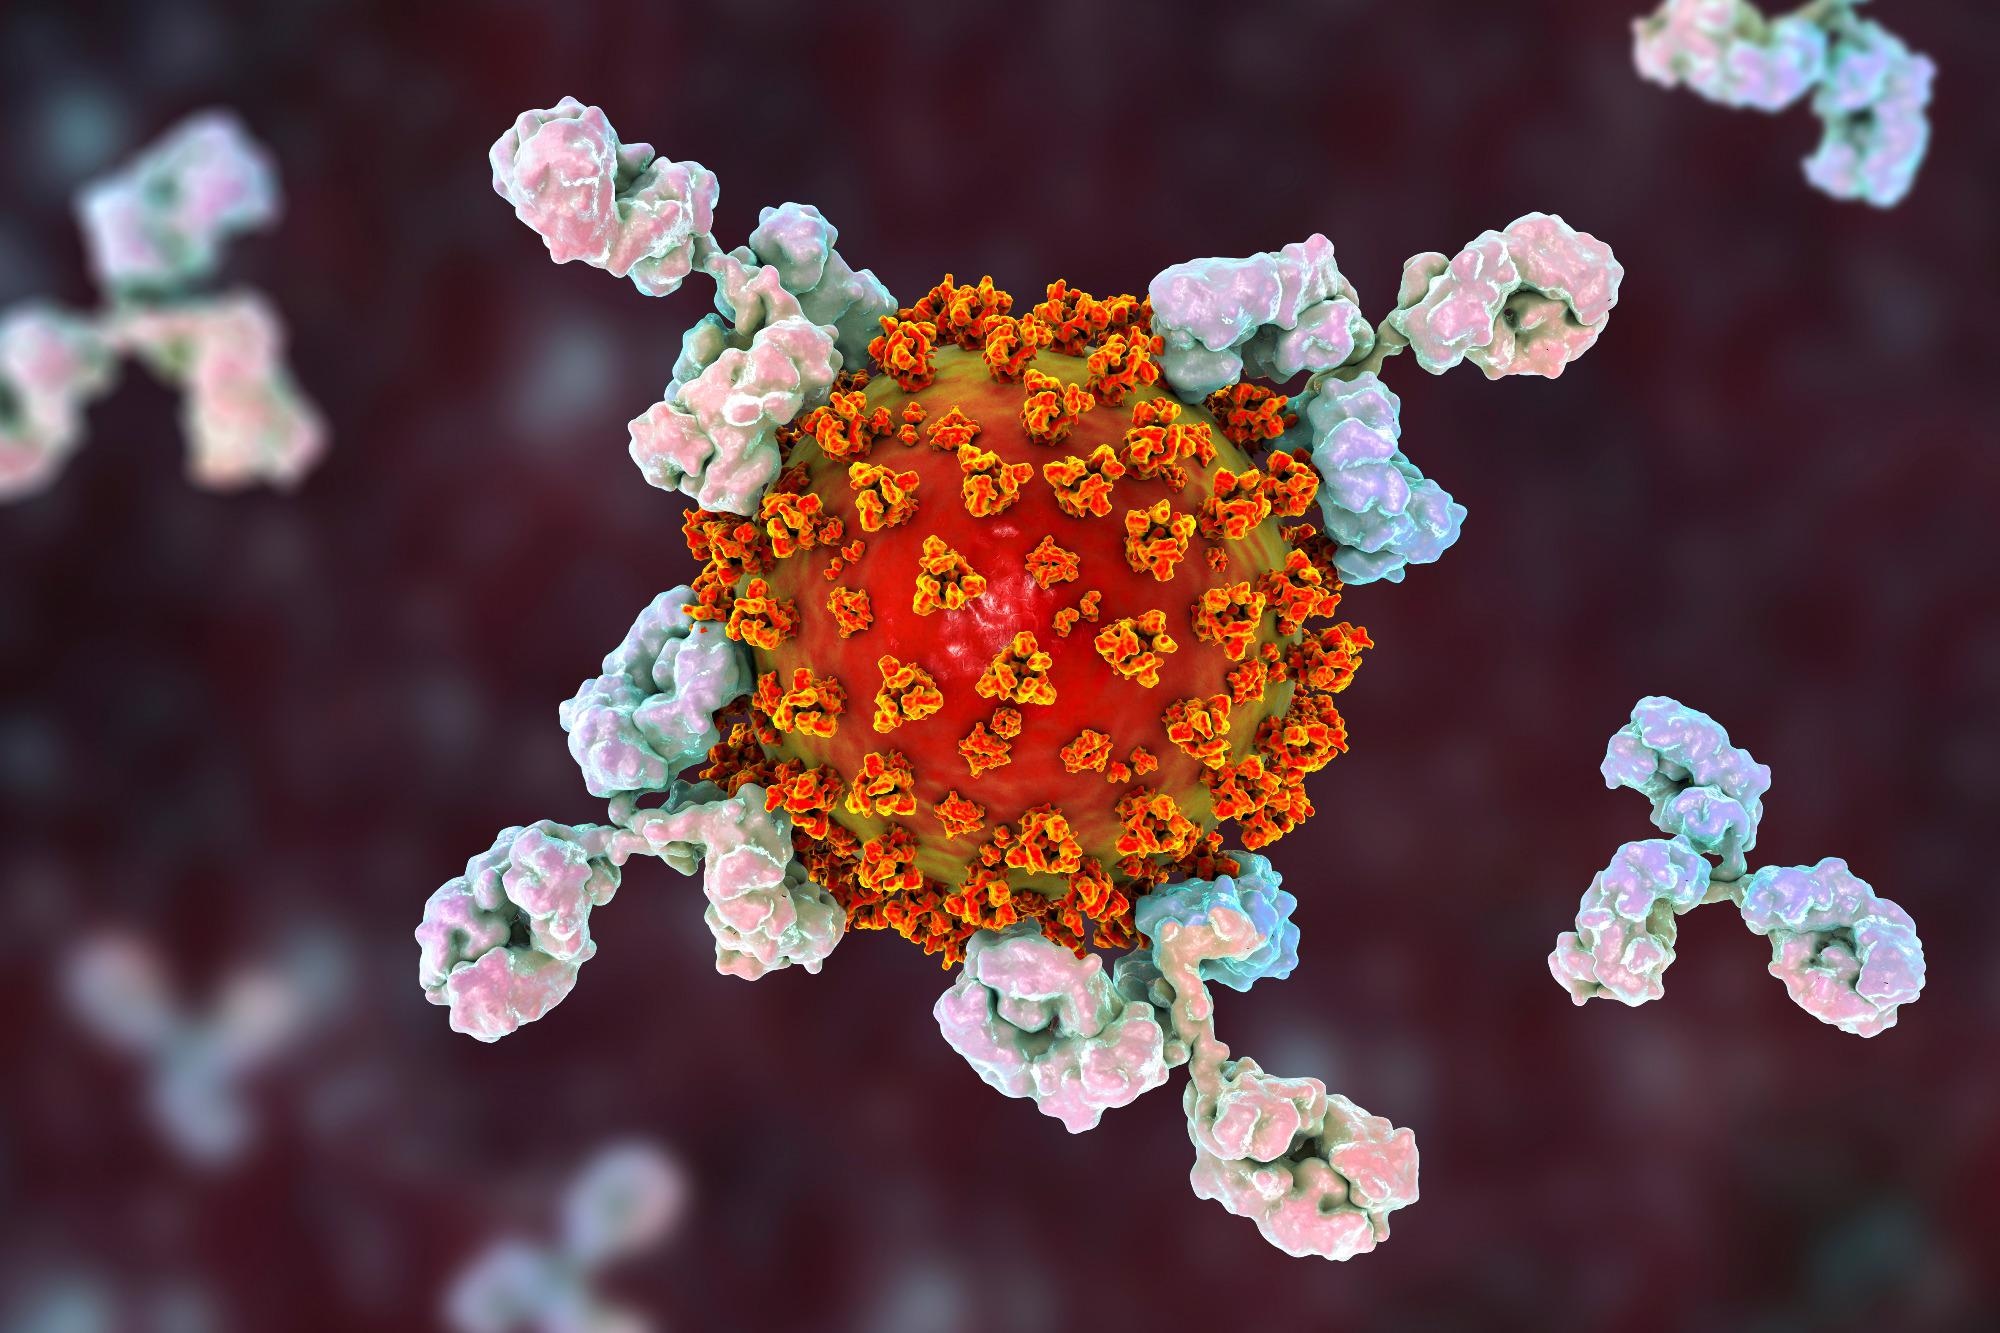 Study: ACE2 nanoparticles prevent cell entry of SARS-CoV-2. Image Credit: Kateryna Kon / Shutterstock